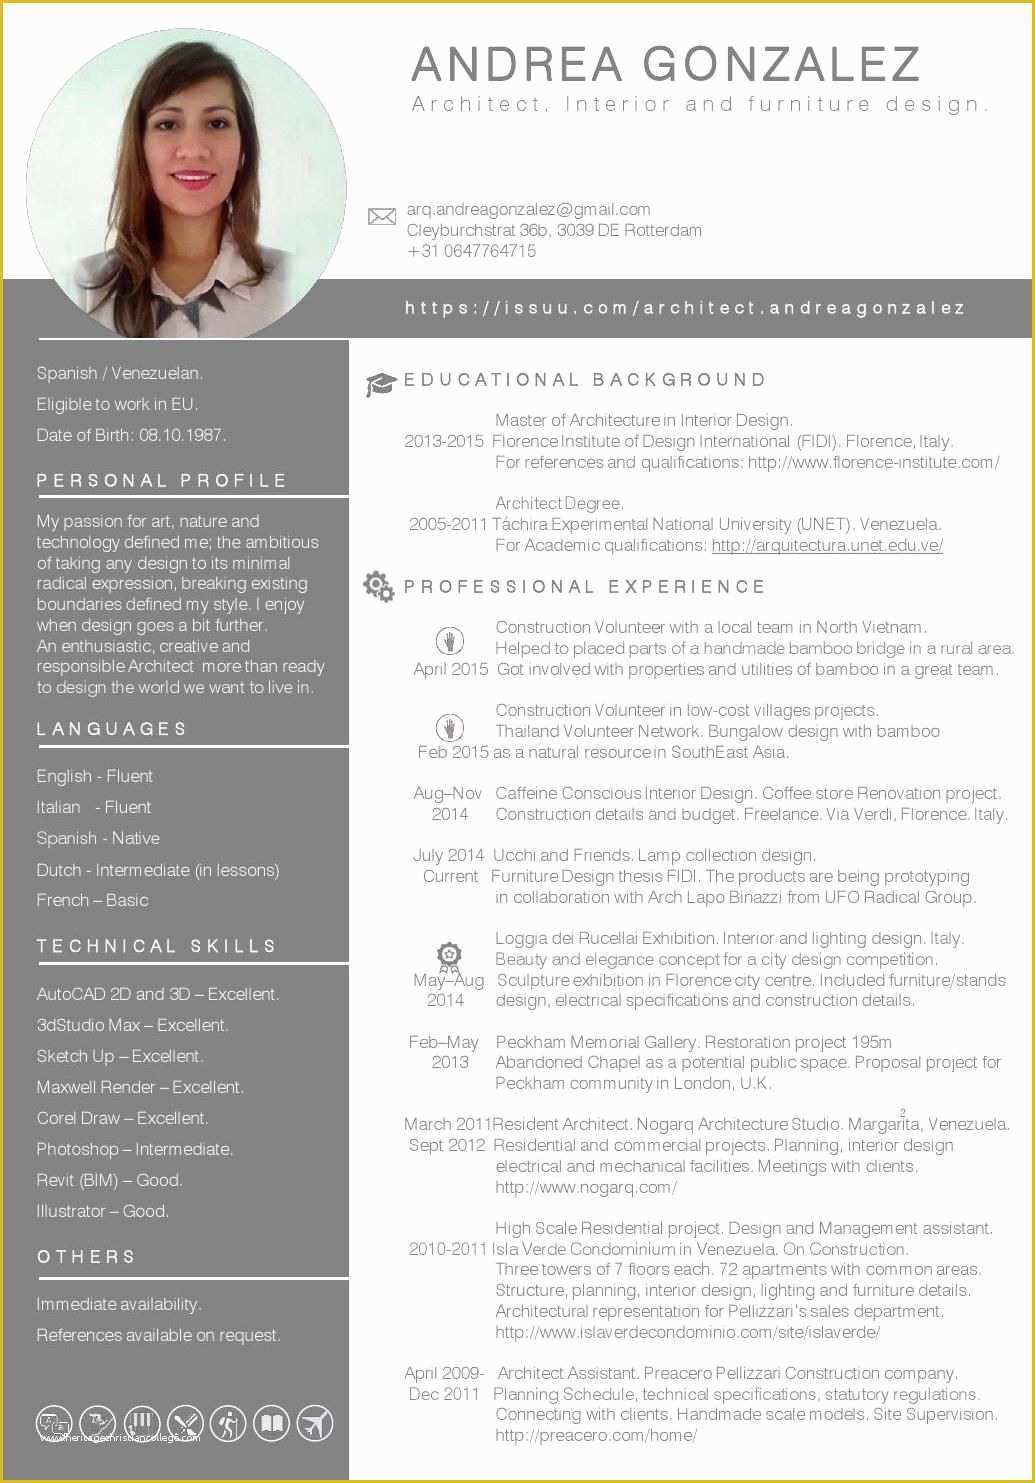 Architecture Resume Template Free Of Clipped issuu From andrea Gonzalez Architect Cv